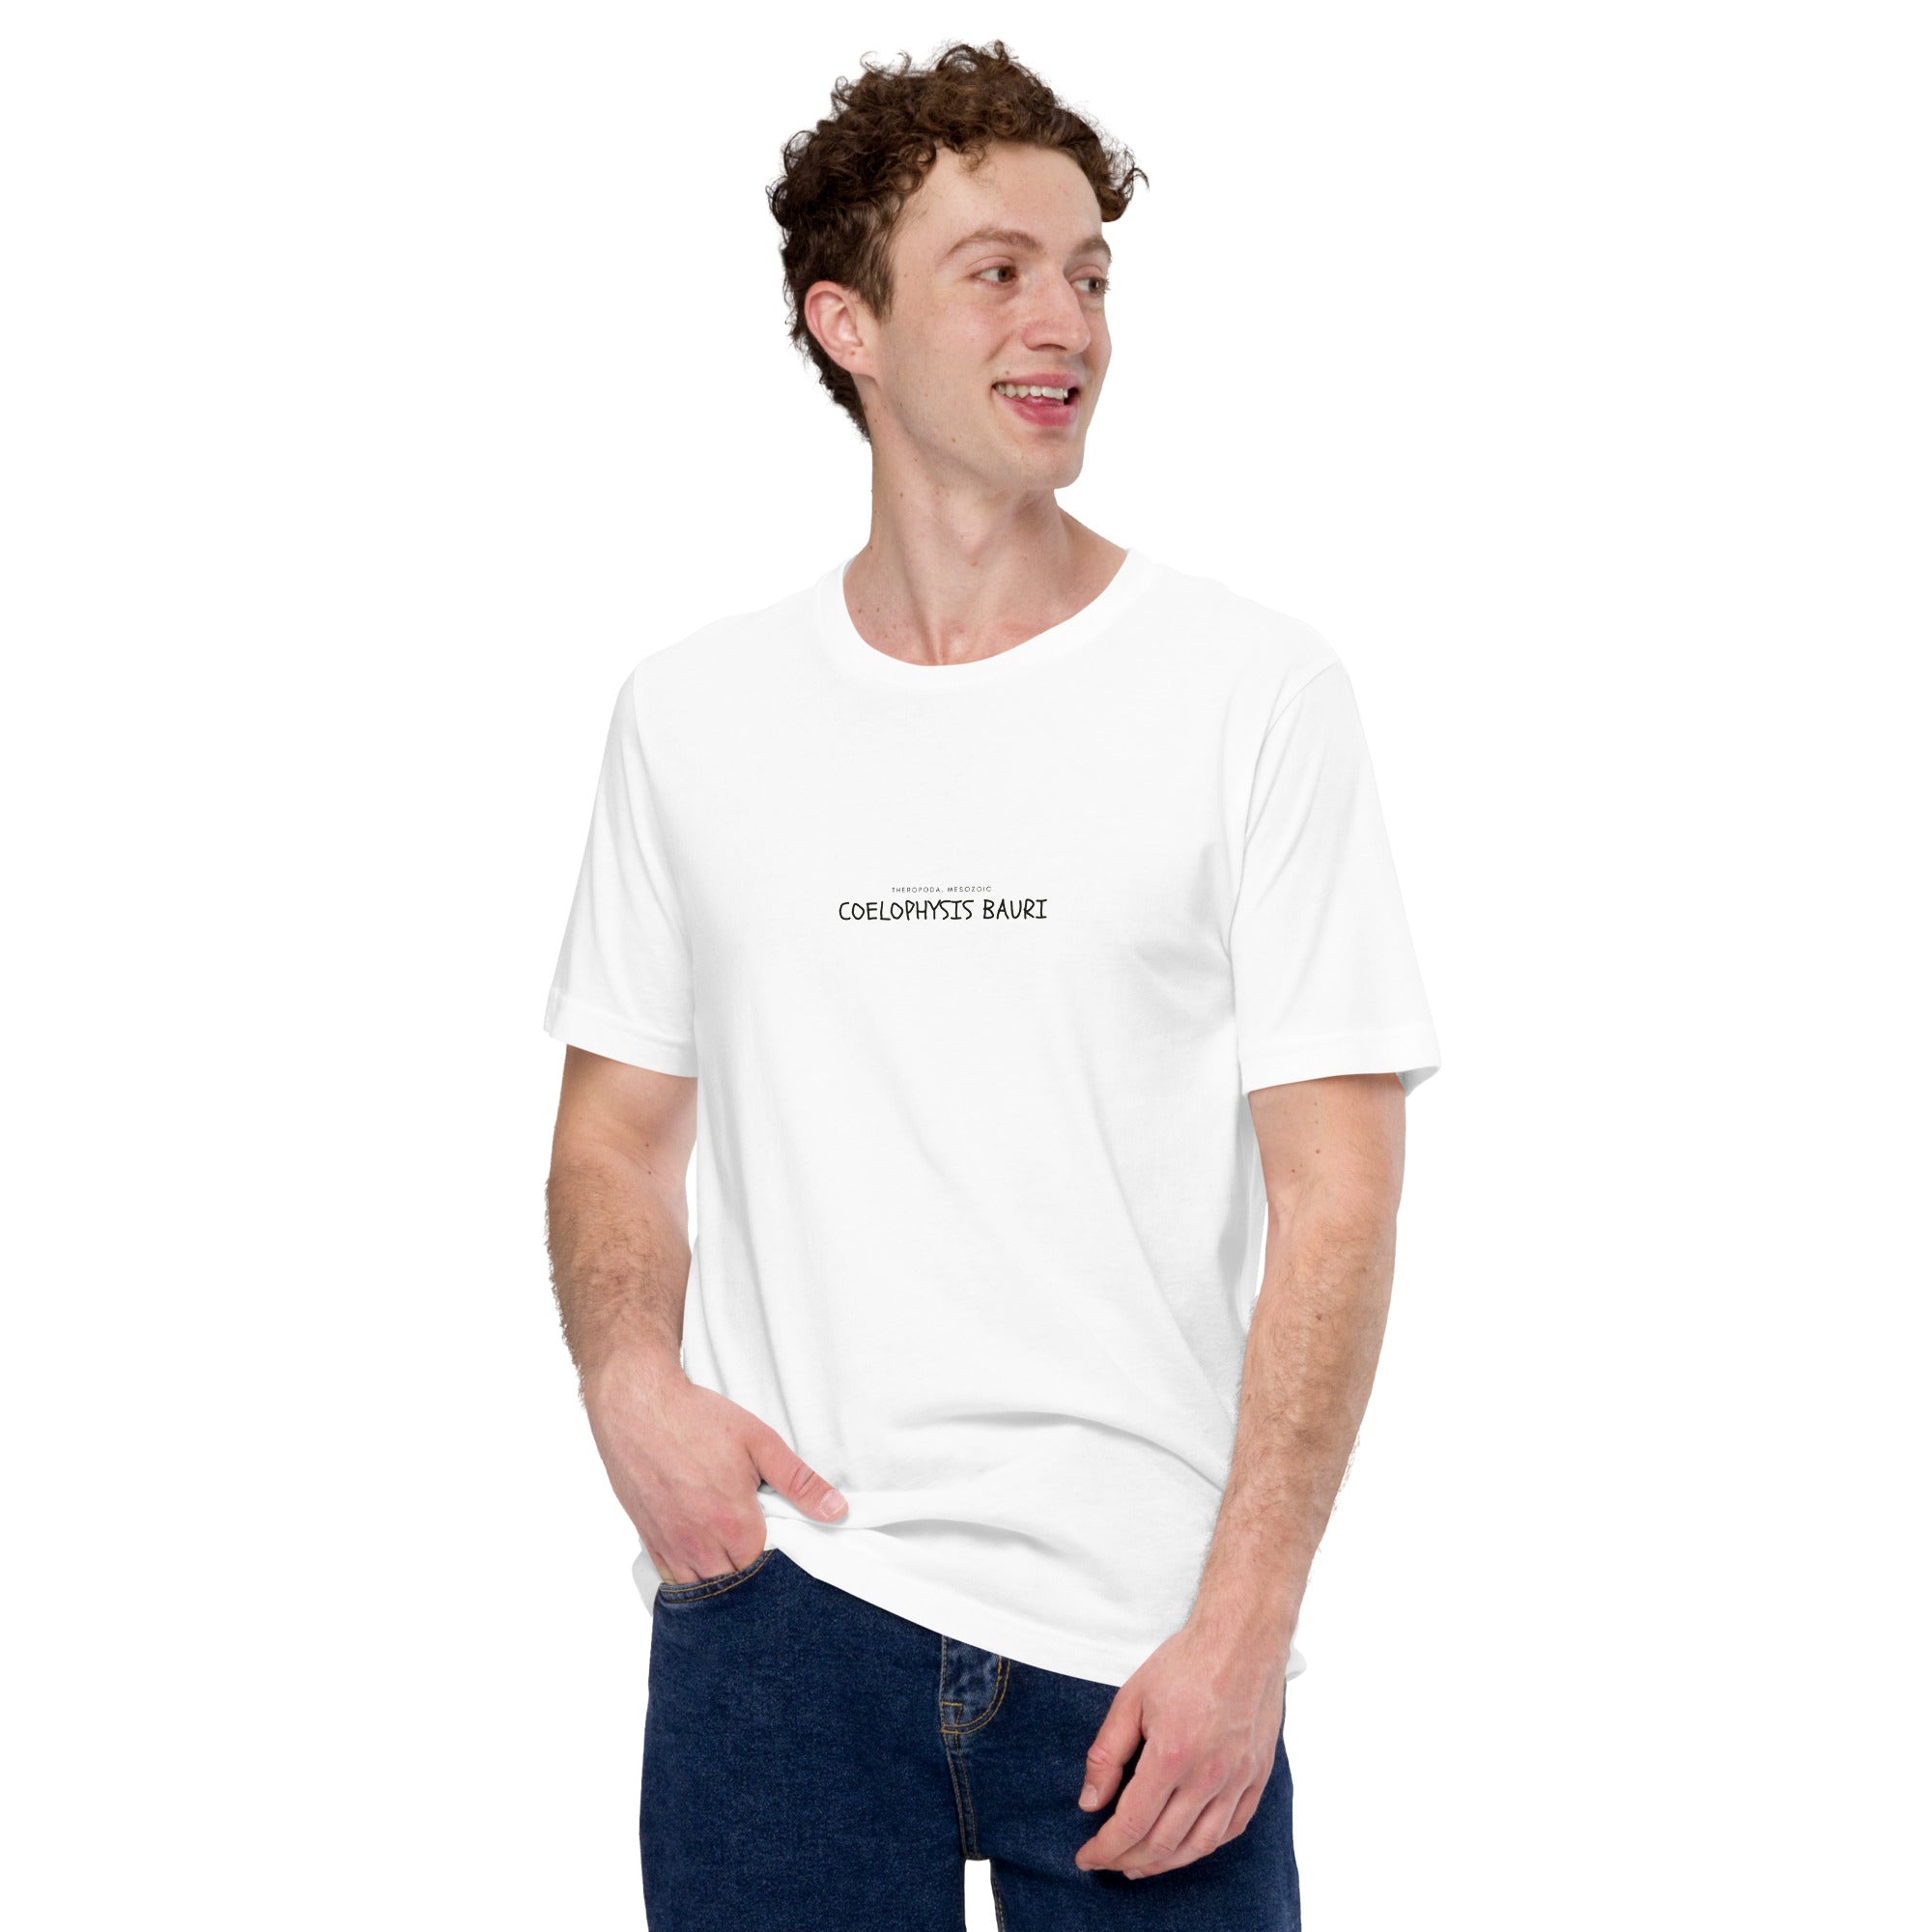 Unisex t-shirt with "Coelophysis bauri" text